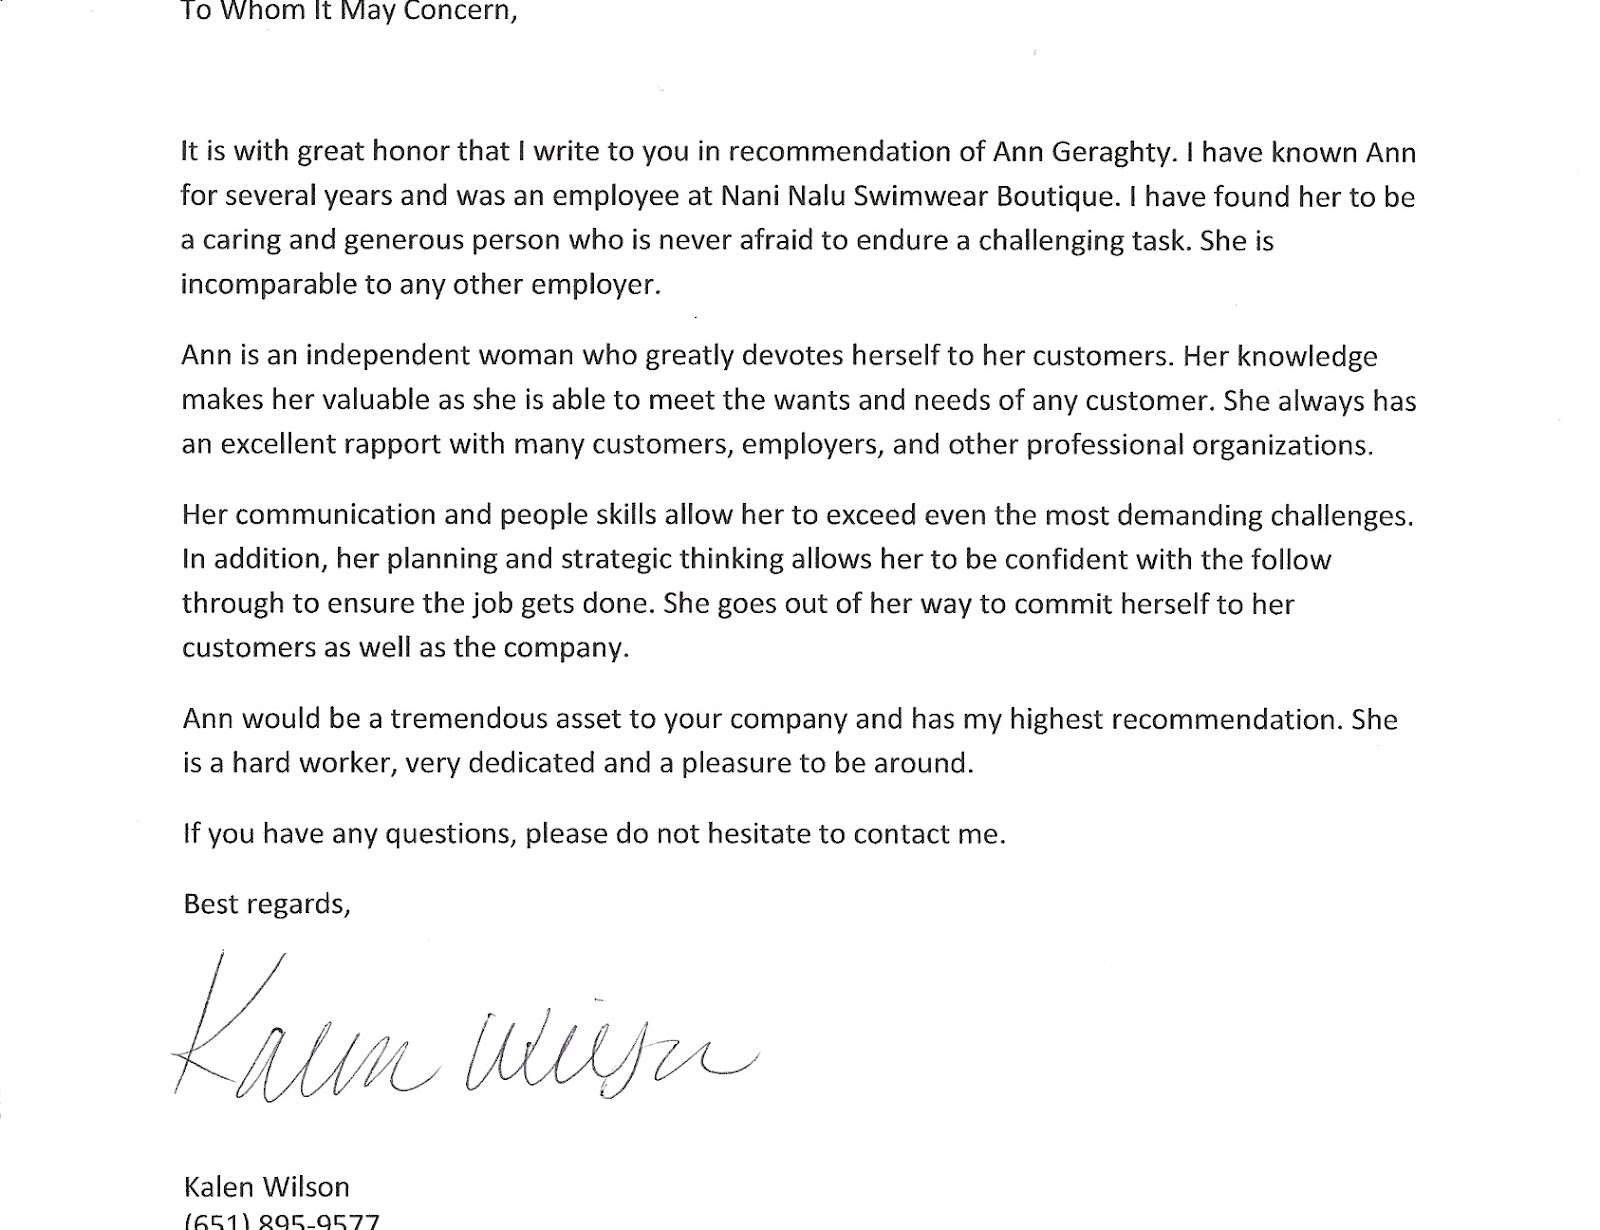 Letter Of Recommendation For Sales Manager - Sales Manager Cover